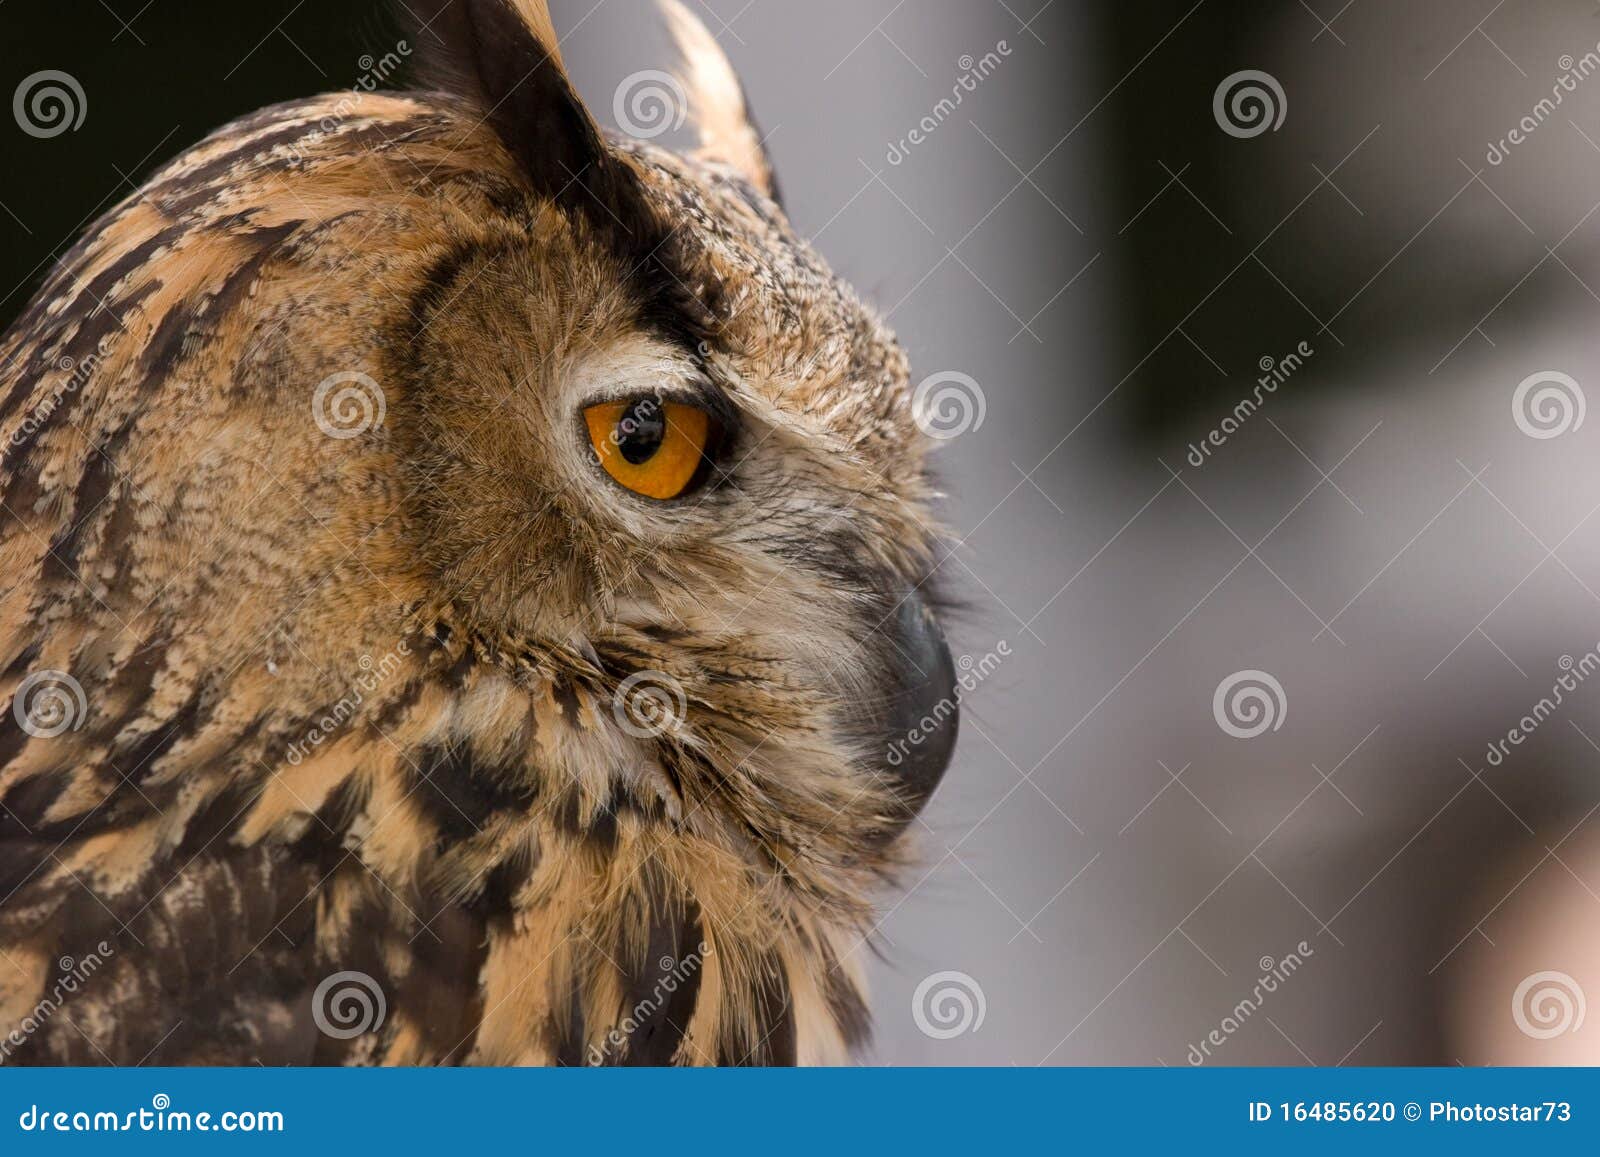 Owl profile stock photo. Image of side, face, feather - 16485620